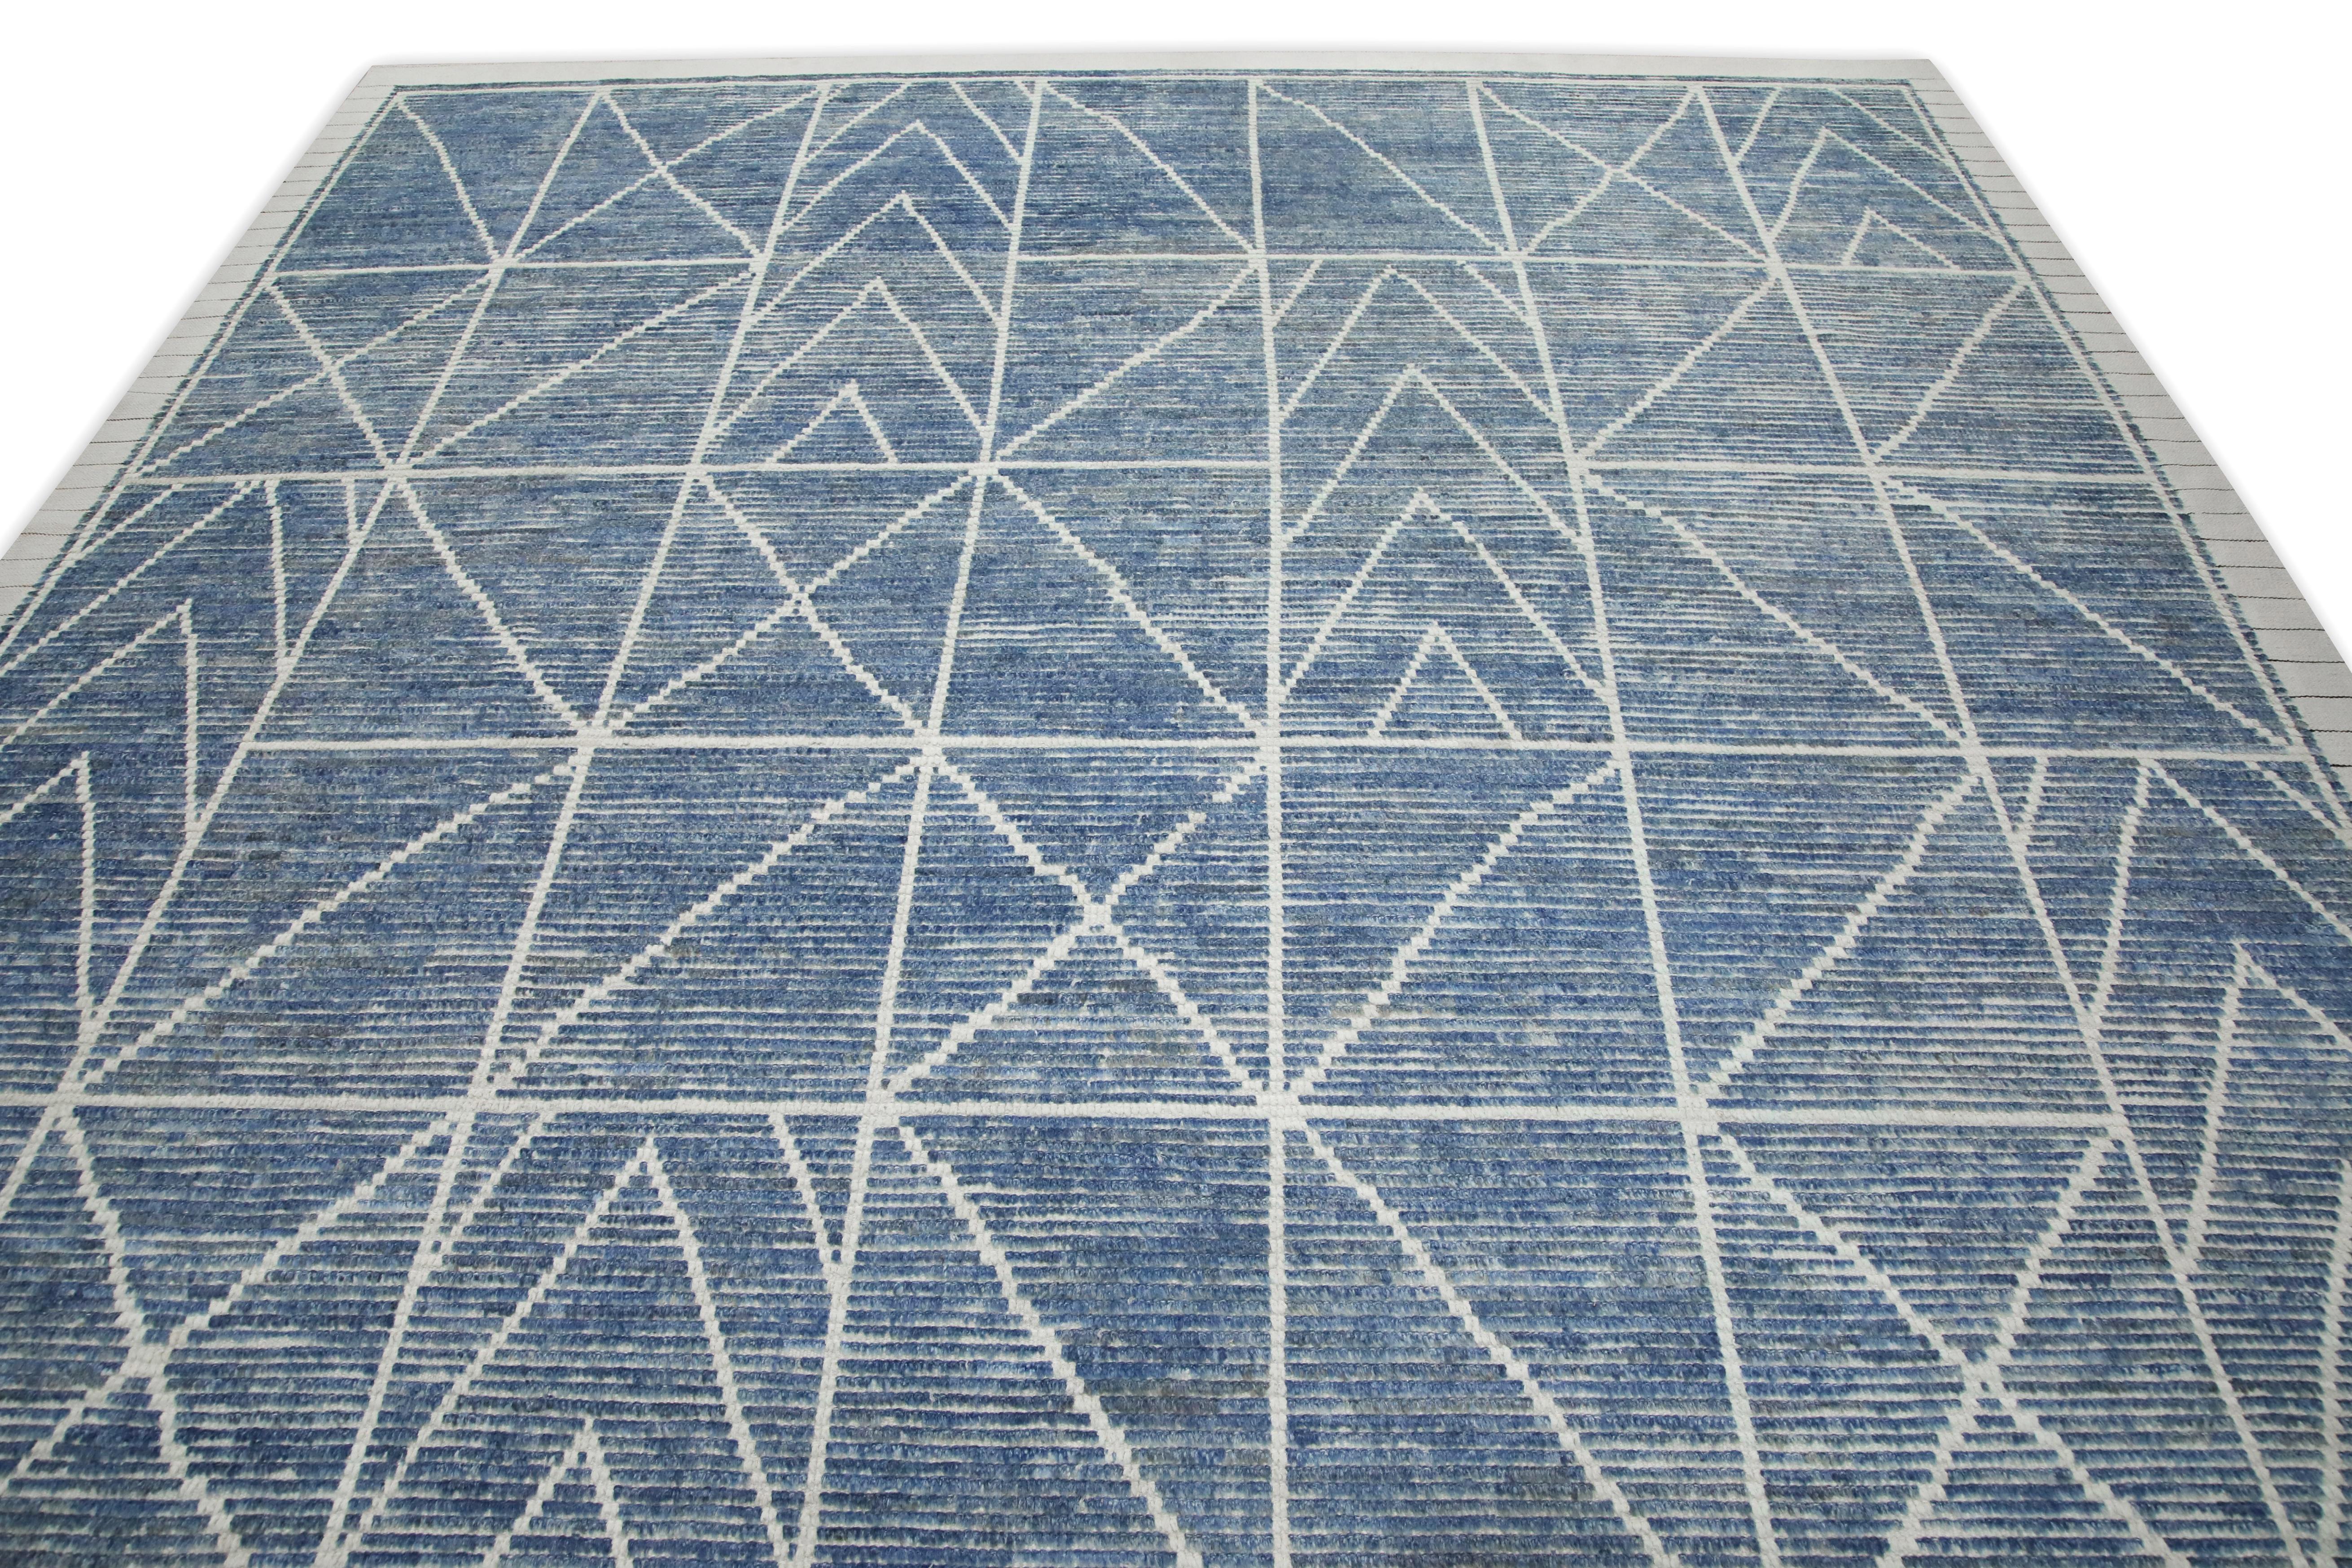 Vegetable Dyed 21st Century Modern Moroccan Style Wool Rug in Blue Design 9'1